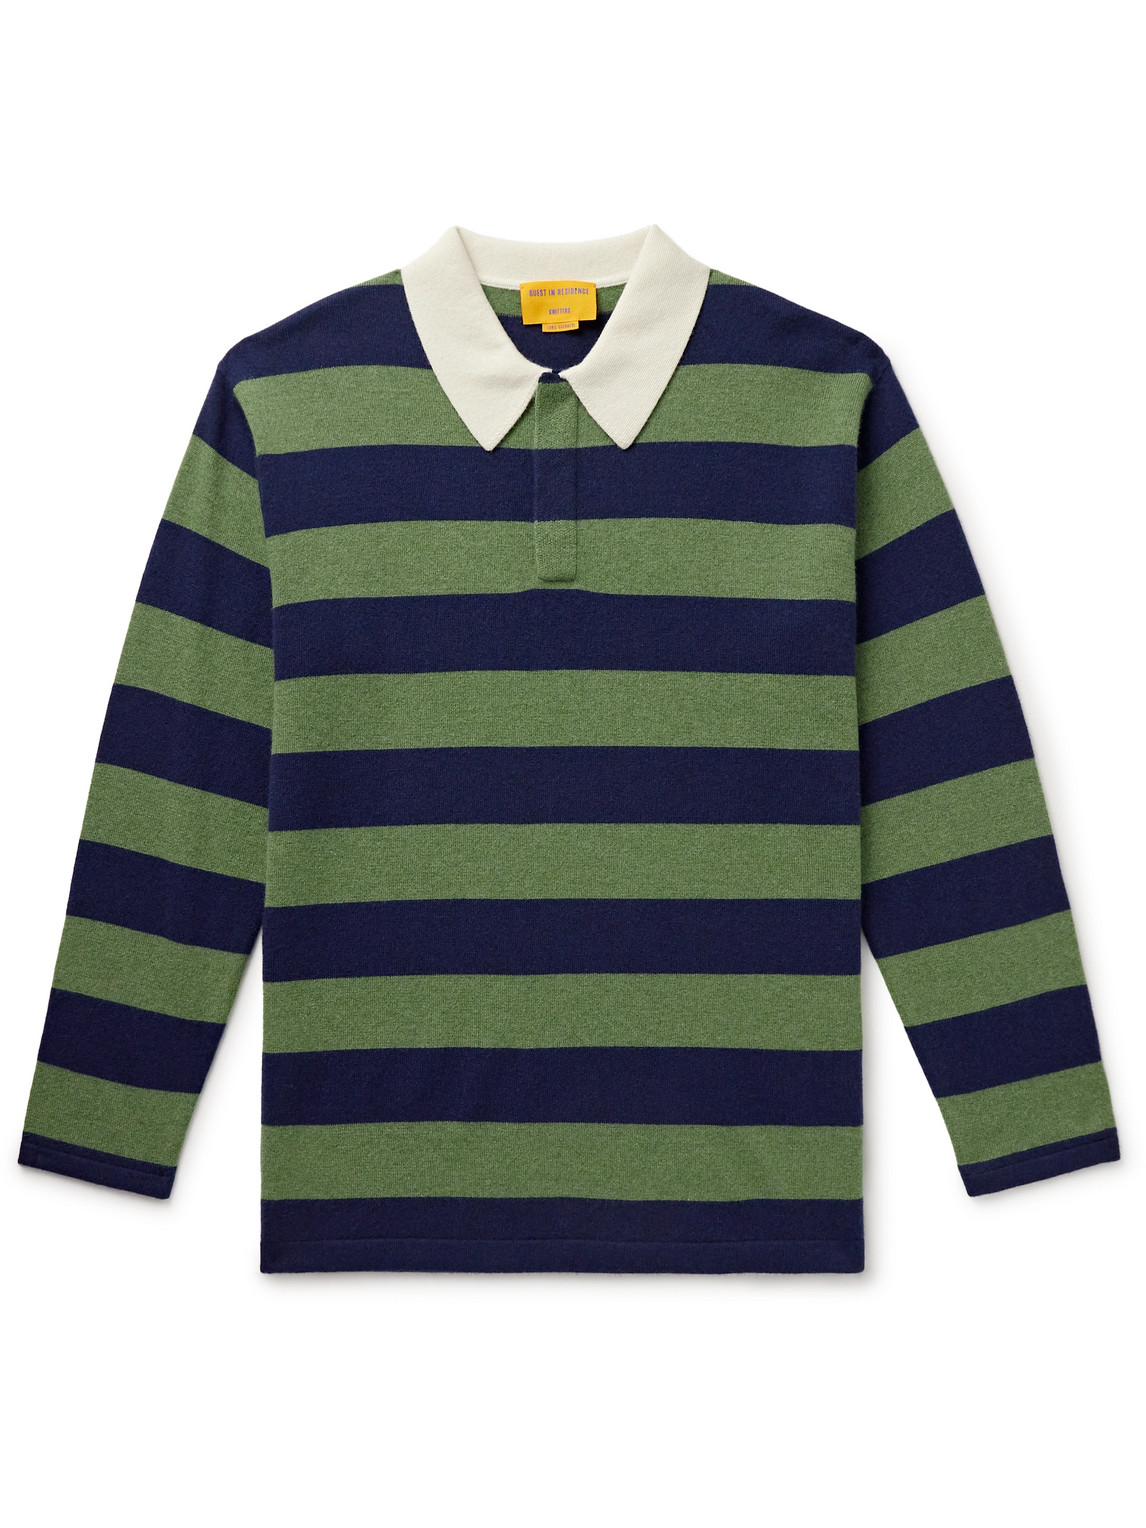 Guest In Residence - Rugby Striped Cashmere Polo Shirt - Men - Green - L von Guest In Residence